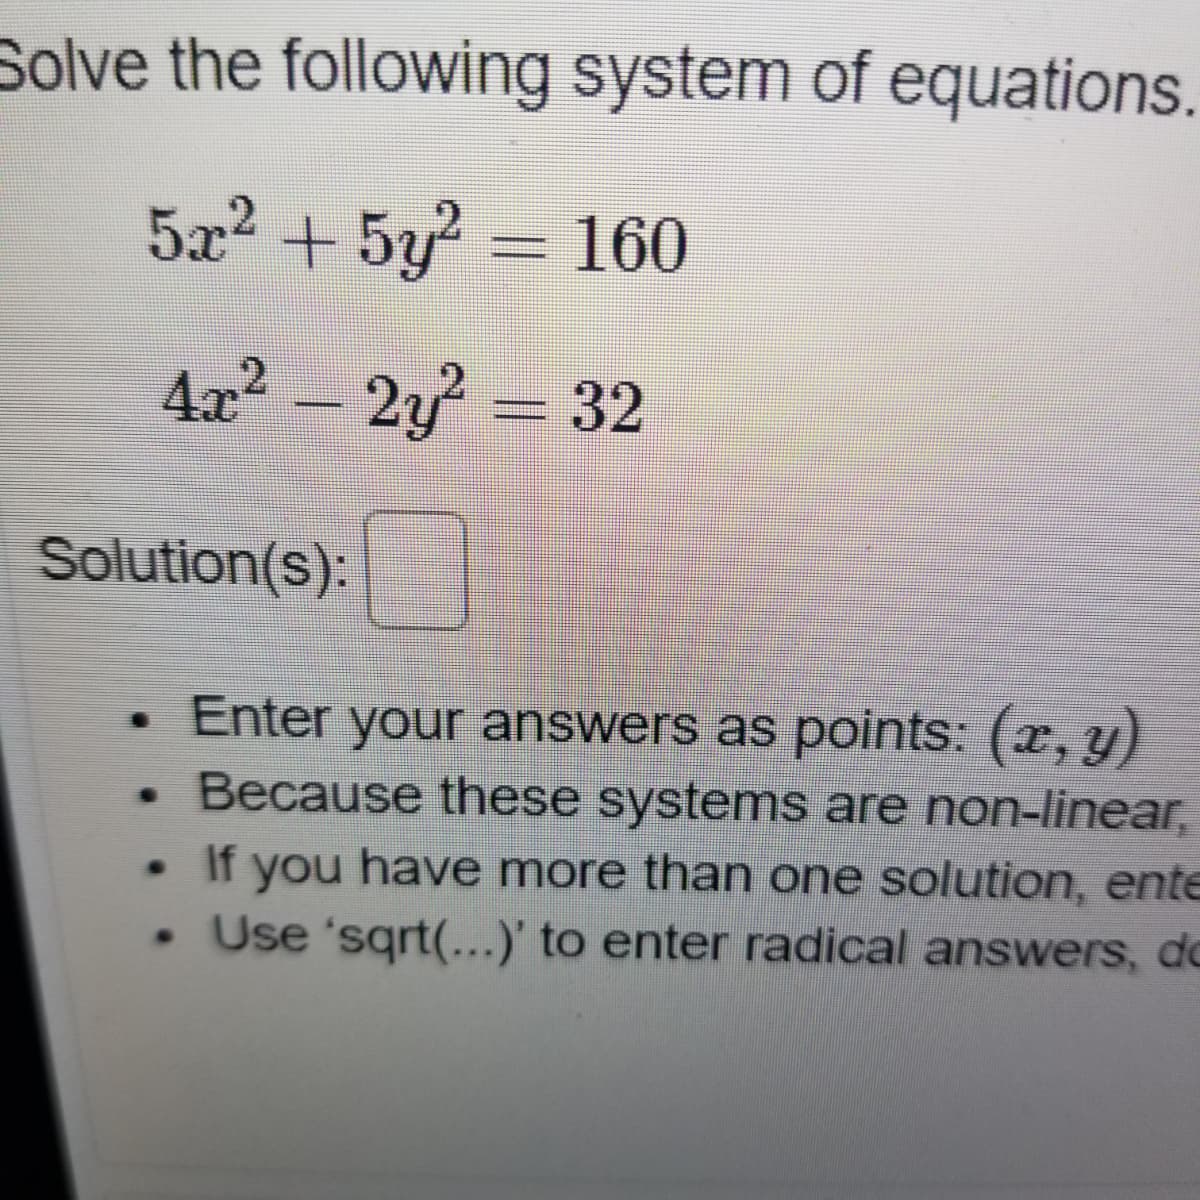 Solve the following system of equations
5x2 + 5y = 160
4x2 - 2y = 32
Solution(s):
Enter your answers as points: (x, y)
Because these systems are non-linear,
. If you have more than one solution, ente
• Use 'sqrt(...)' to enter radical answers, do
